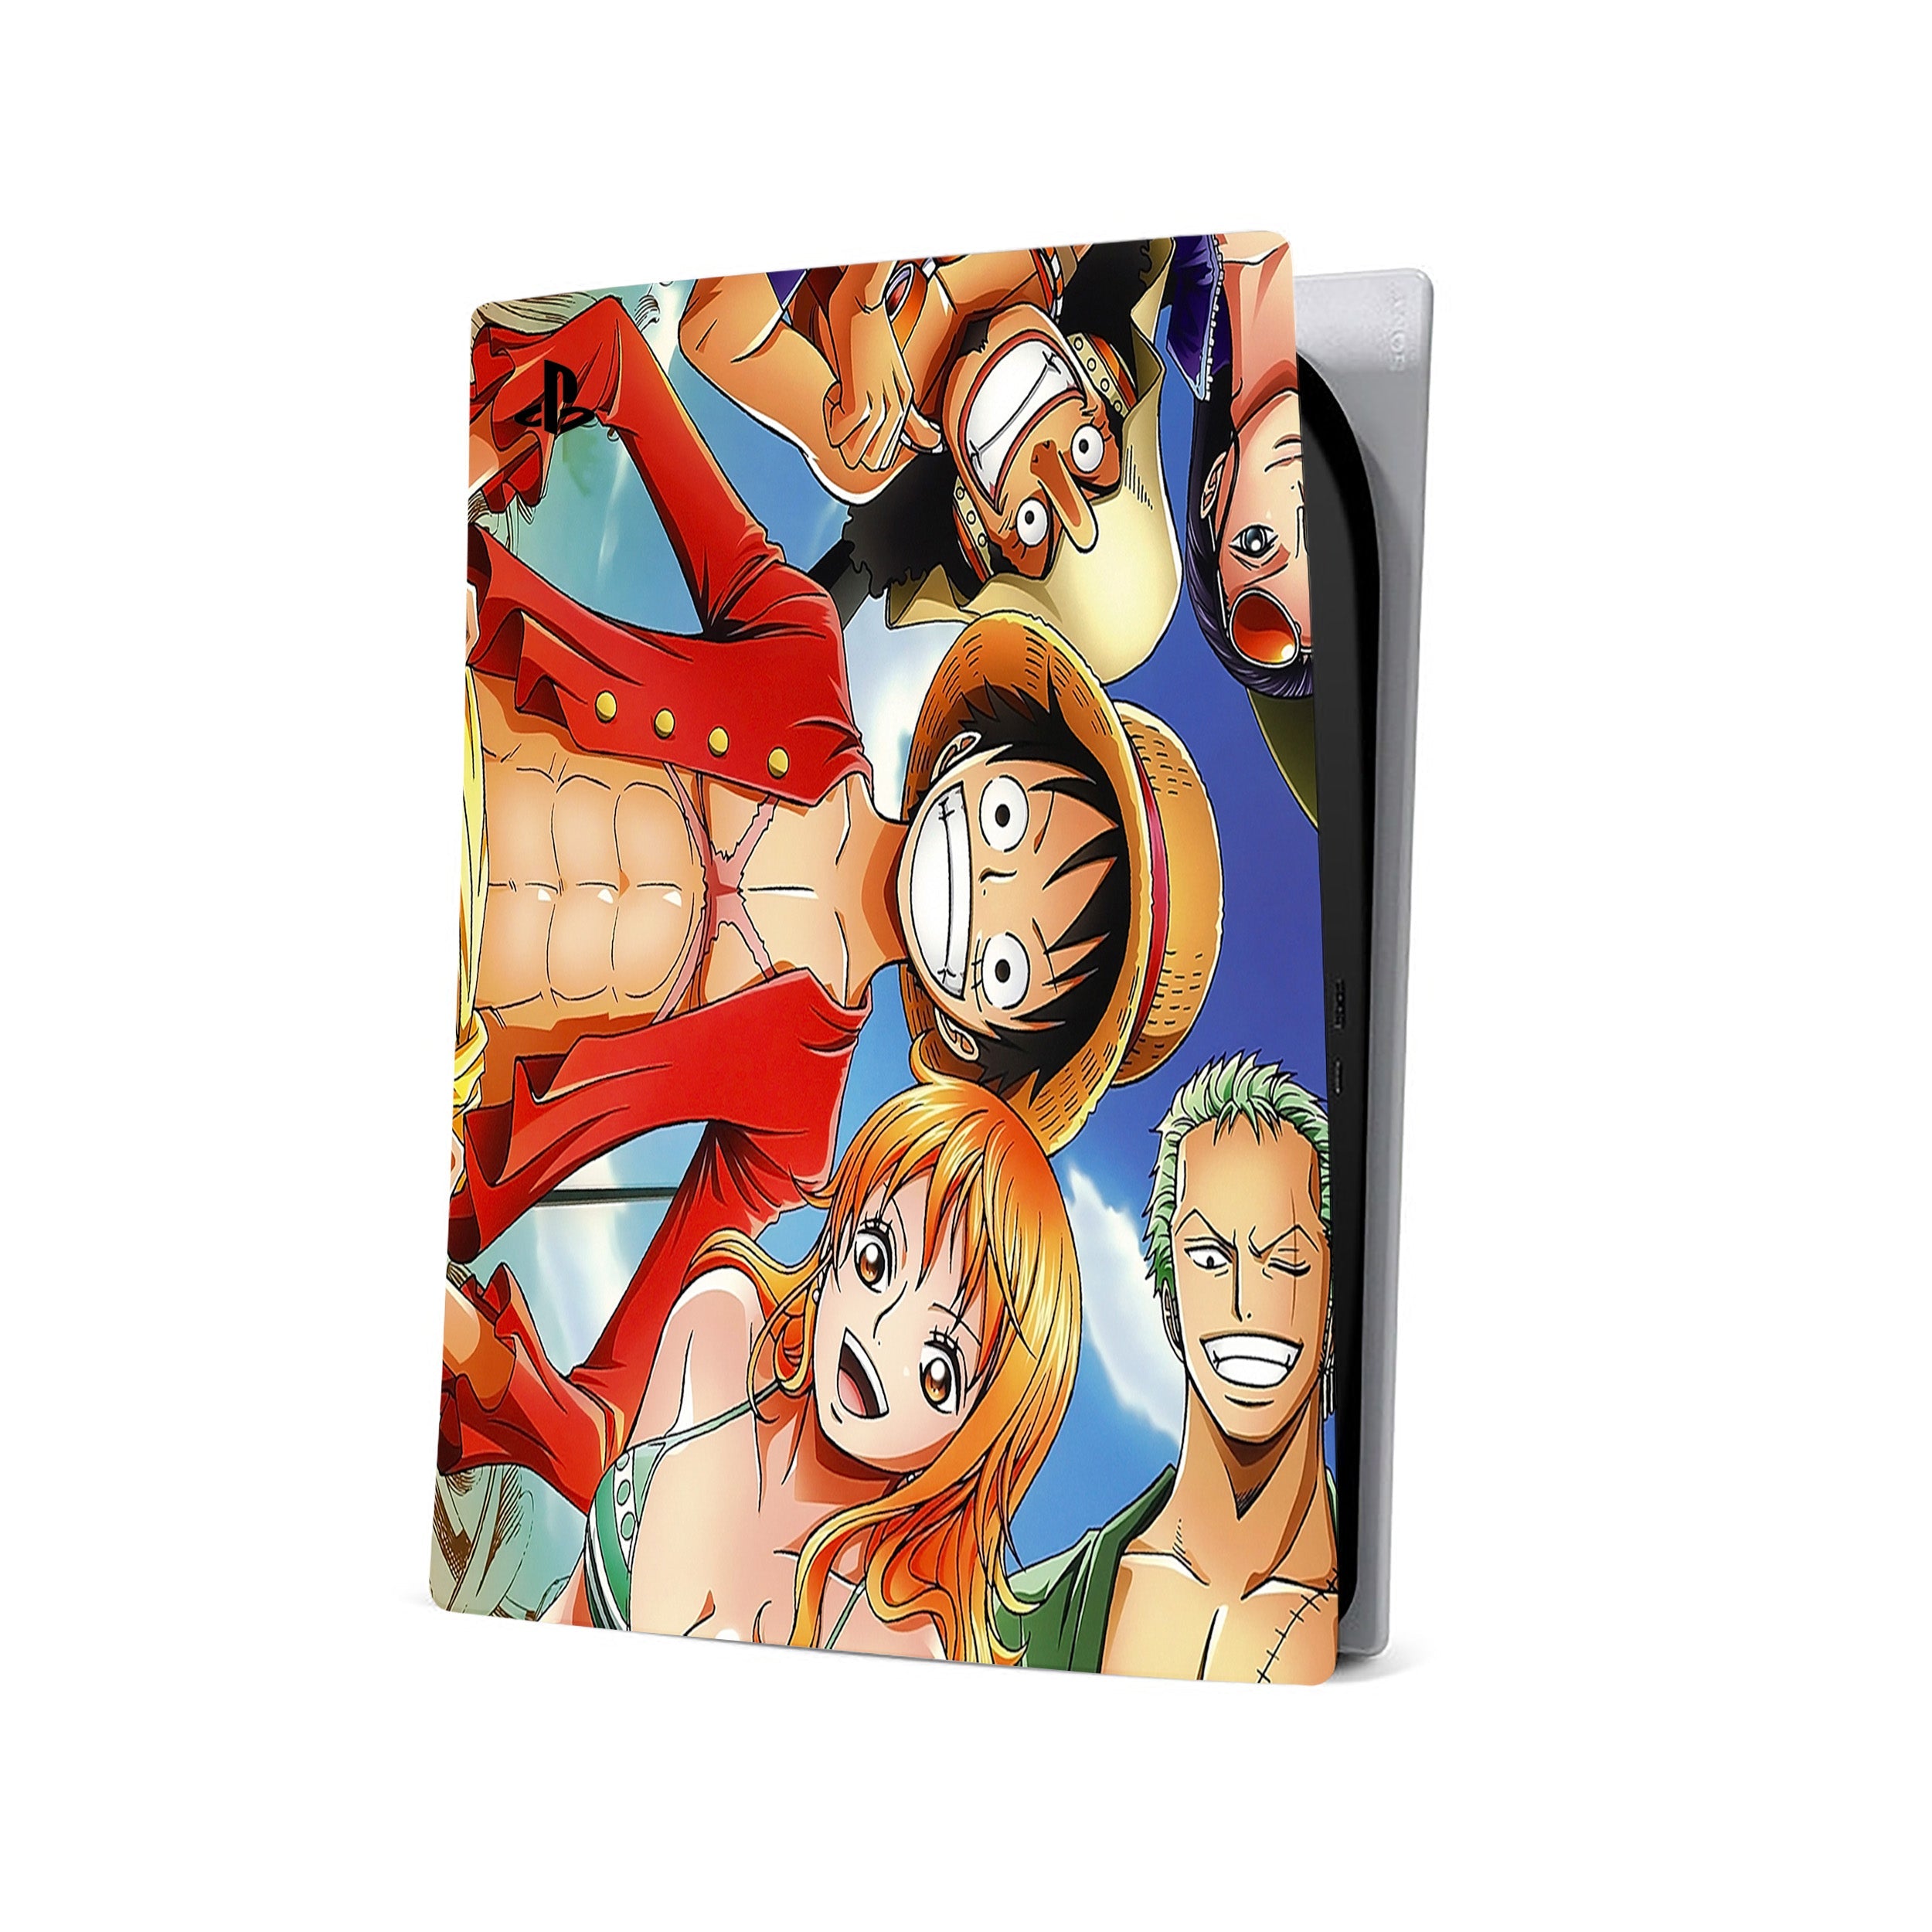 A video game skin featuring a One Piece design for the PS5.